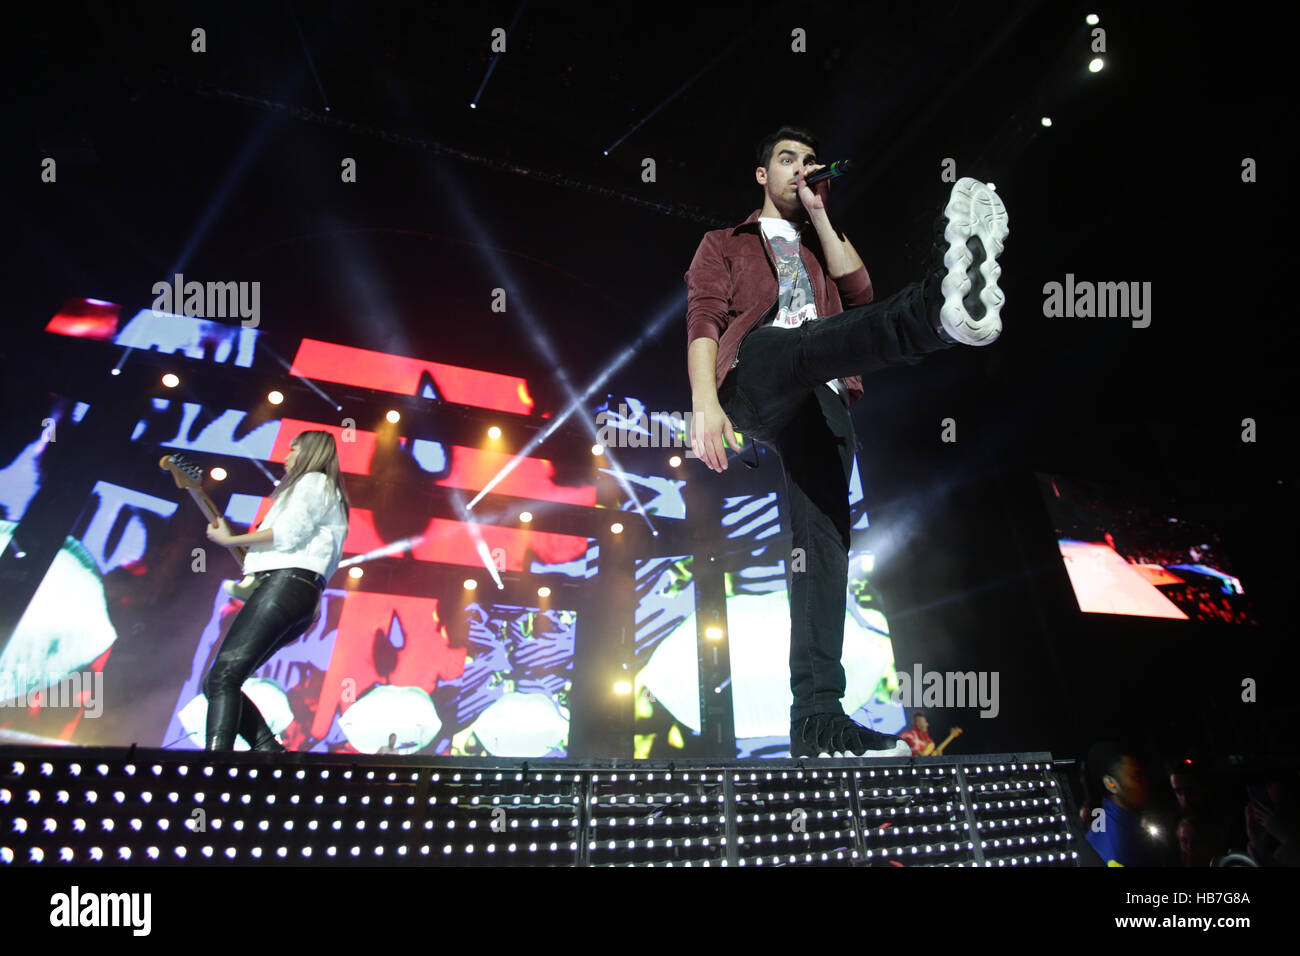 Joe Jonas of DNCE performs on stage at Capital's Jingle Bell Ball with Coca-Cola at London's O2 arena. PRESS ASSOCIATION Photo. Picture date: Sunday 4th December 2016. Photo credit should read: Yui Mok/PA Wire Stock Photo